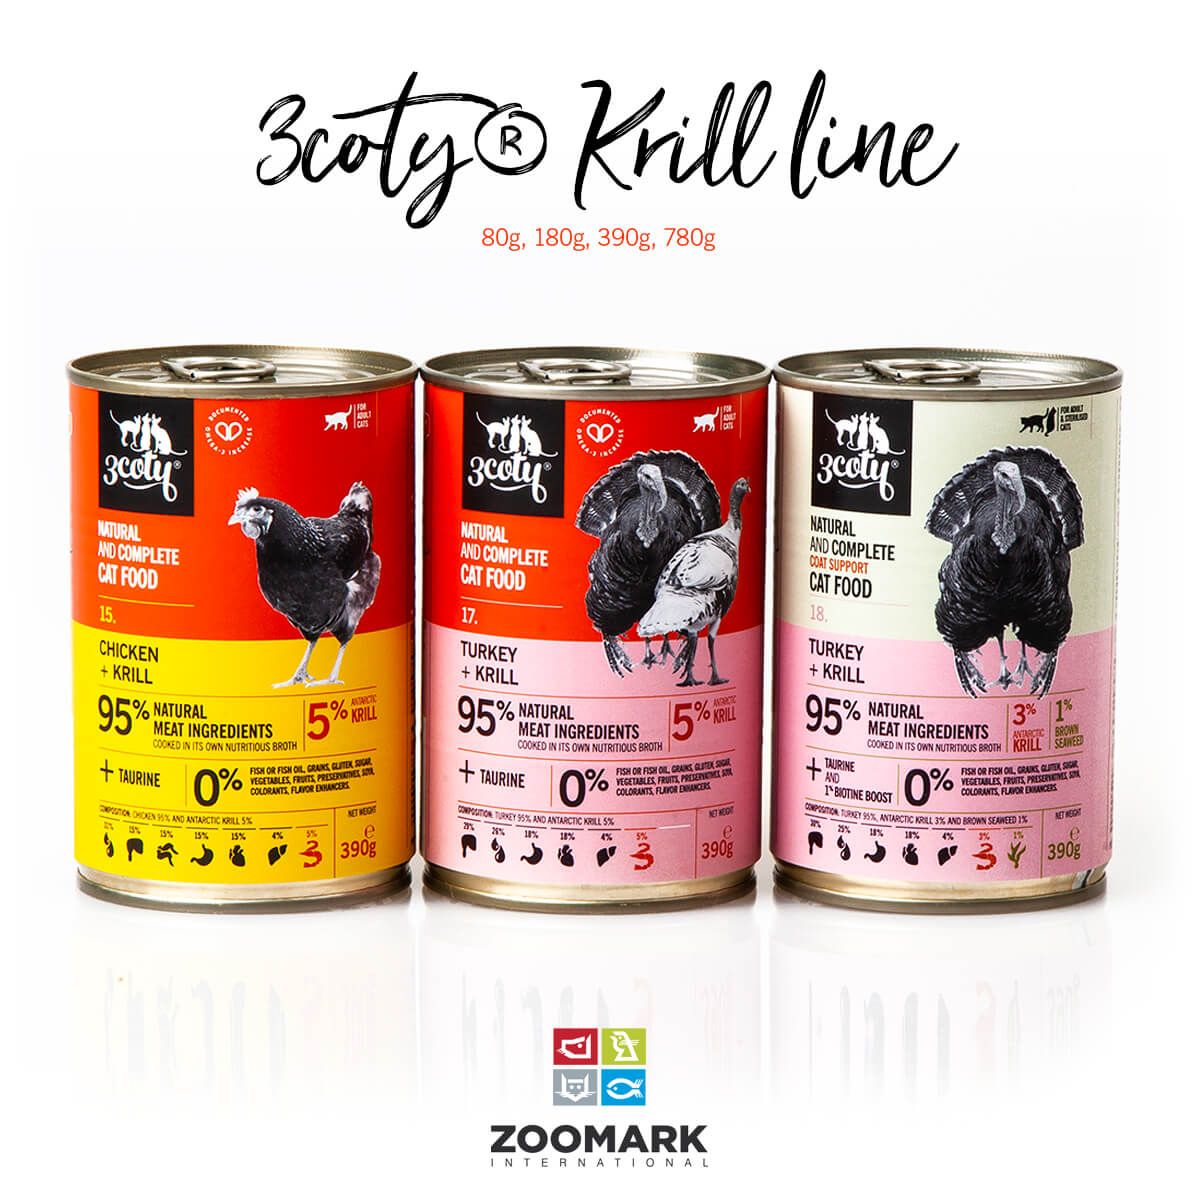 3coty® launch new Antarctic krill range with Aker BioMarine at Zoomark